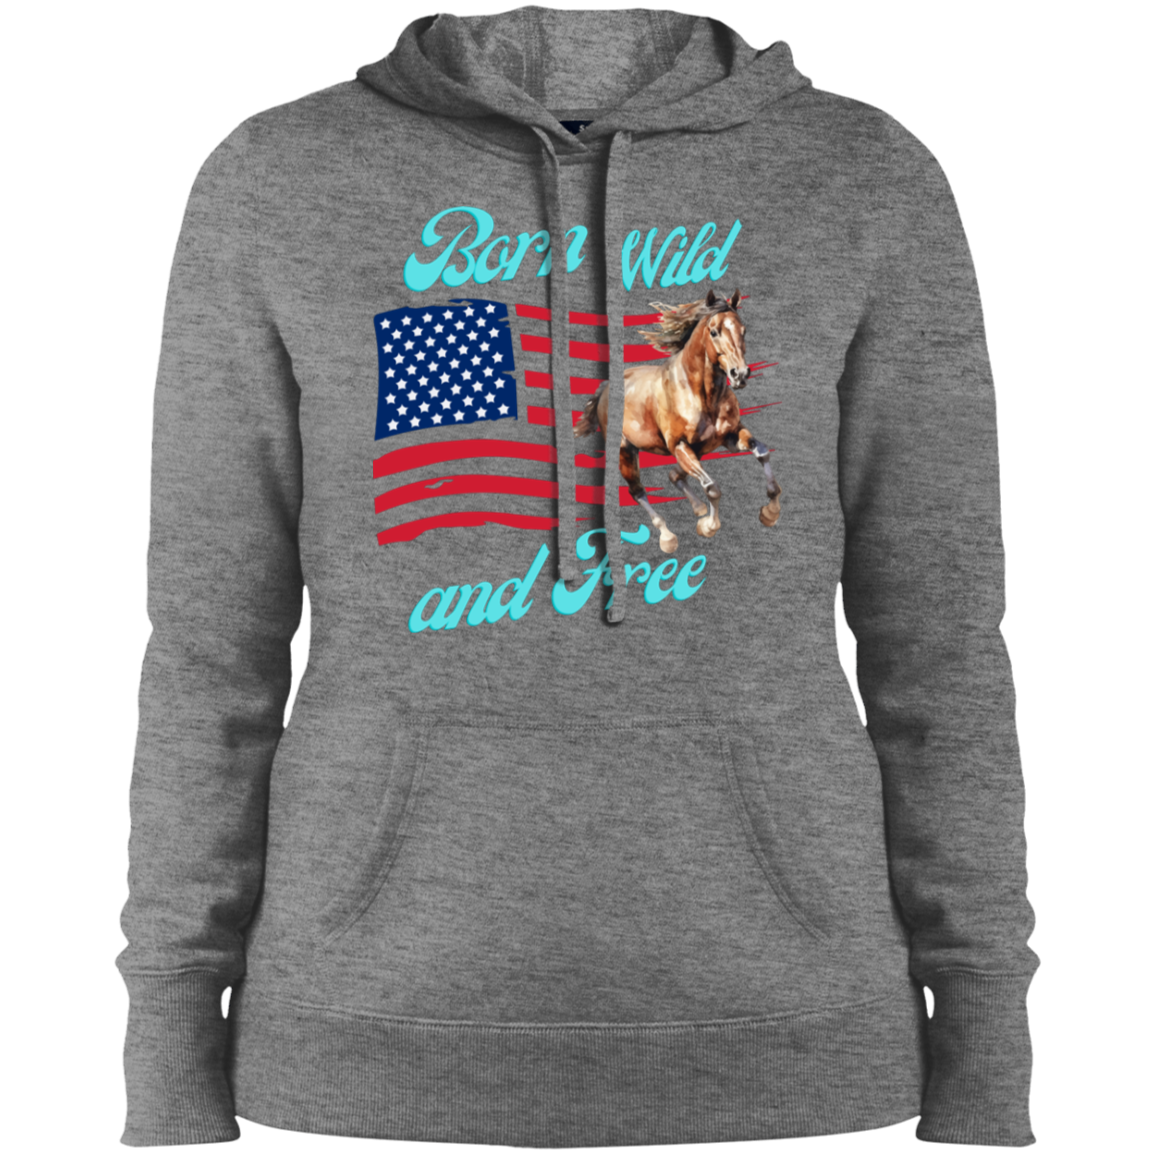 Born Wild and Free American Flag and Mustang Hoodie